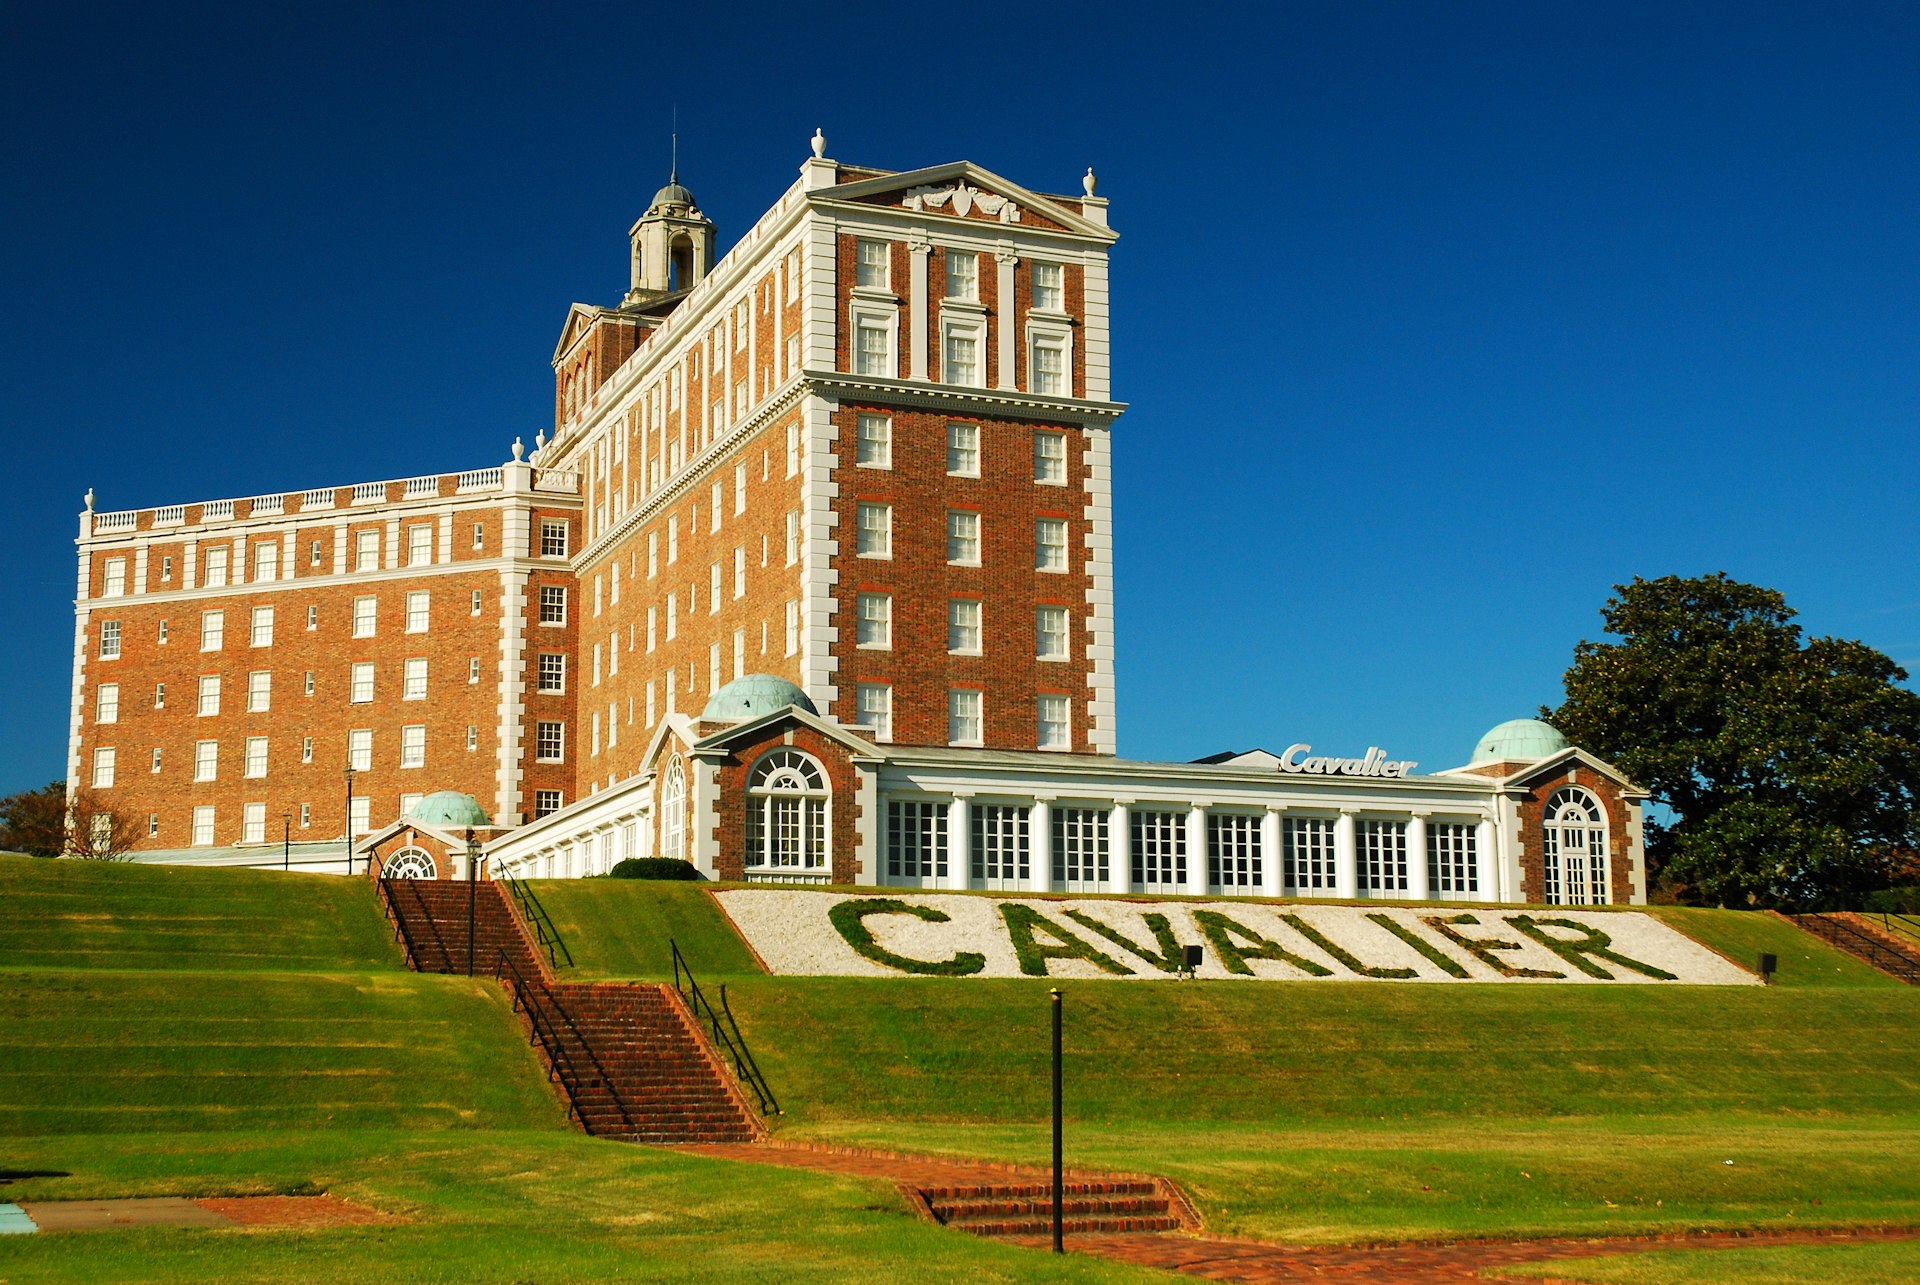 The exterior of the Cavalier Hotel in Virginia Beach, Virginia – one of the few remaining grand hotels at the seaside resort town